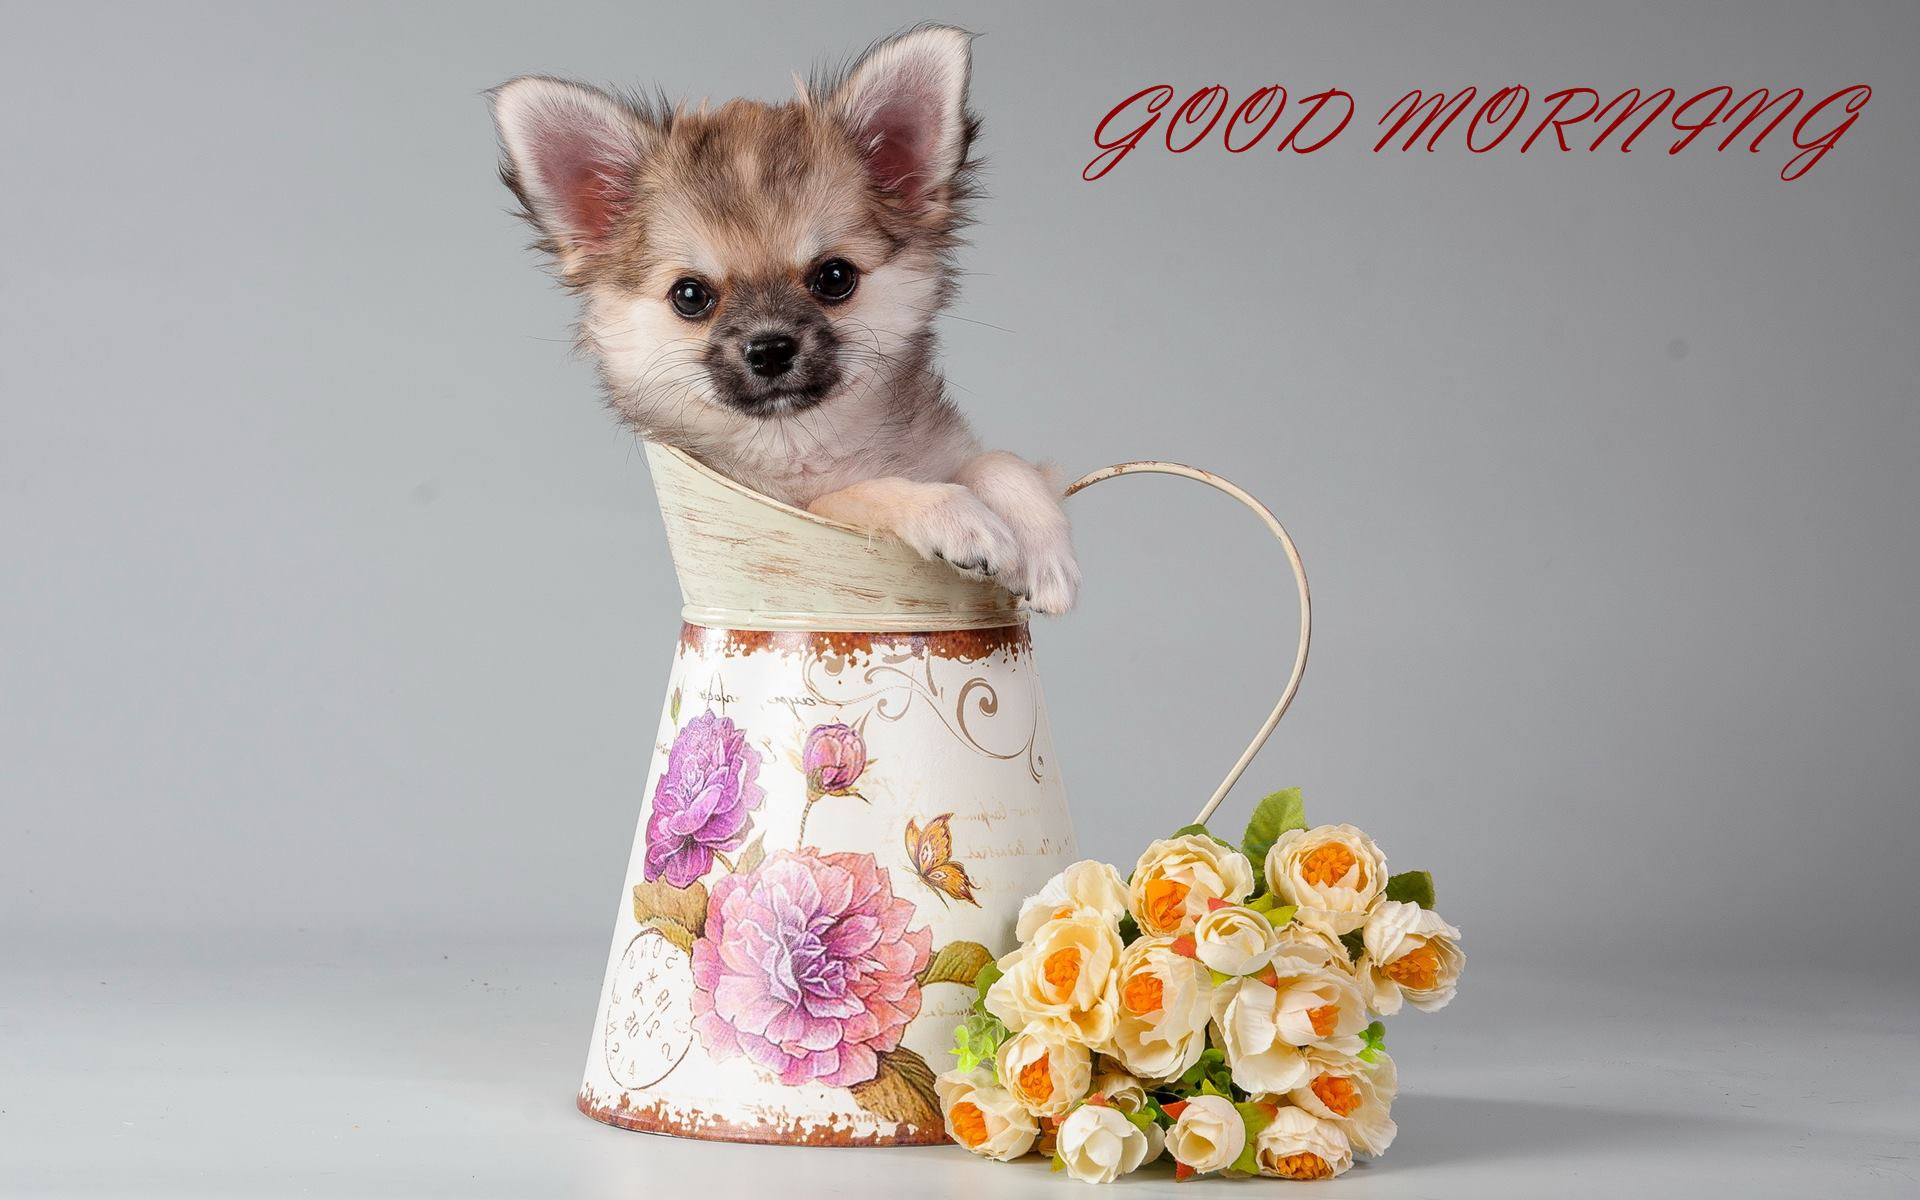 1920x1200 Lovable Good Morning Cute Puppy Dog And Rose Flowers Hd Wallpaper #02575  Plus Mesmerizing Puppies Good Morning Wallpaper